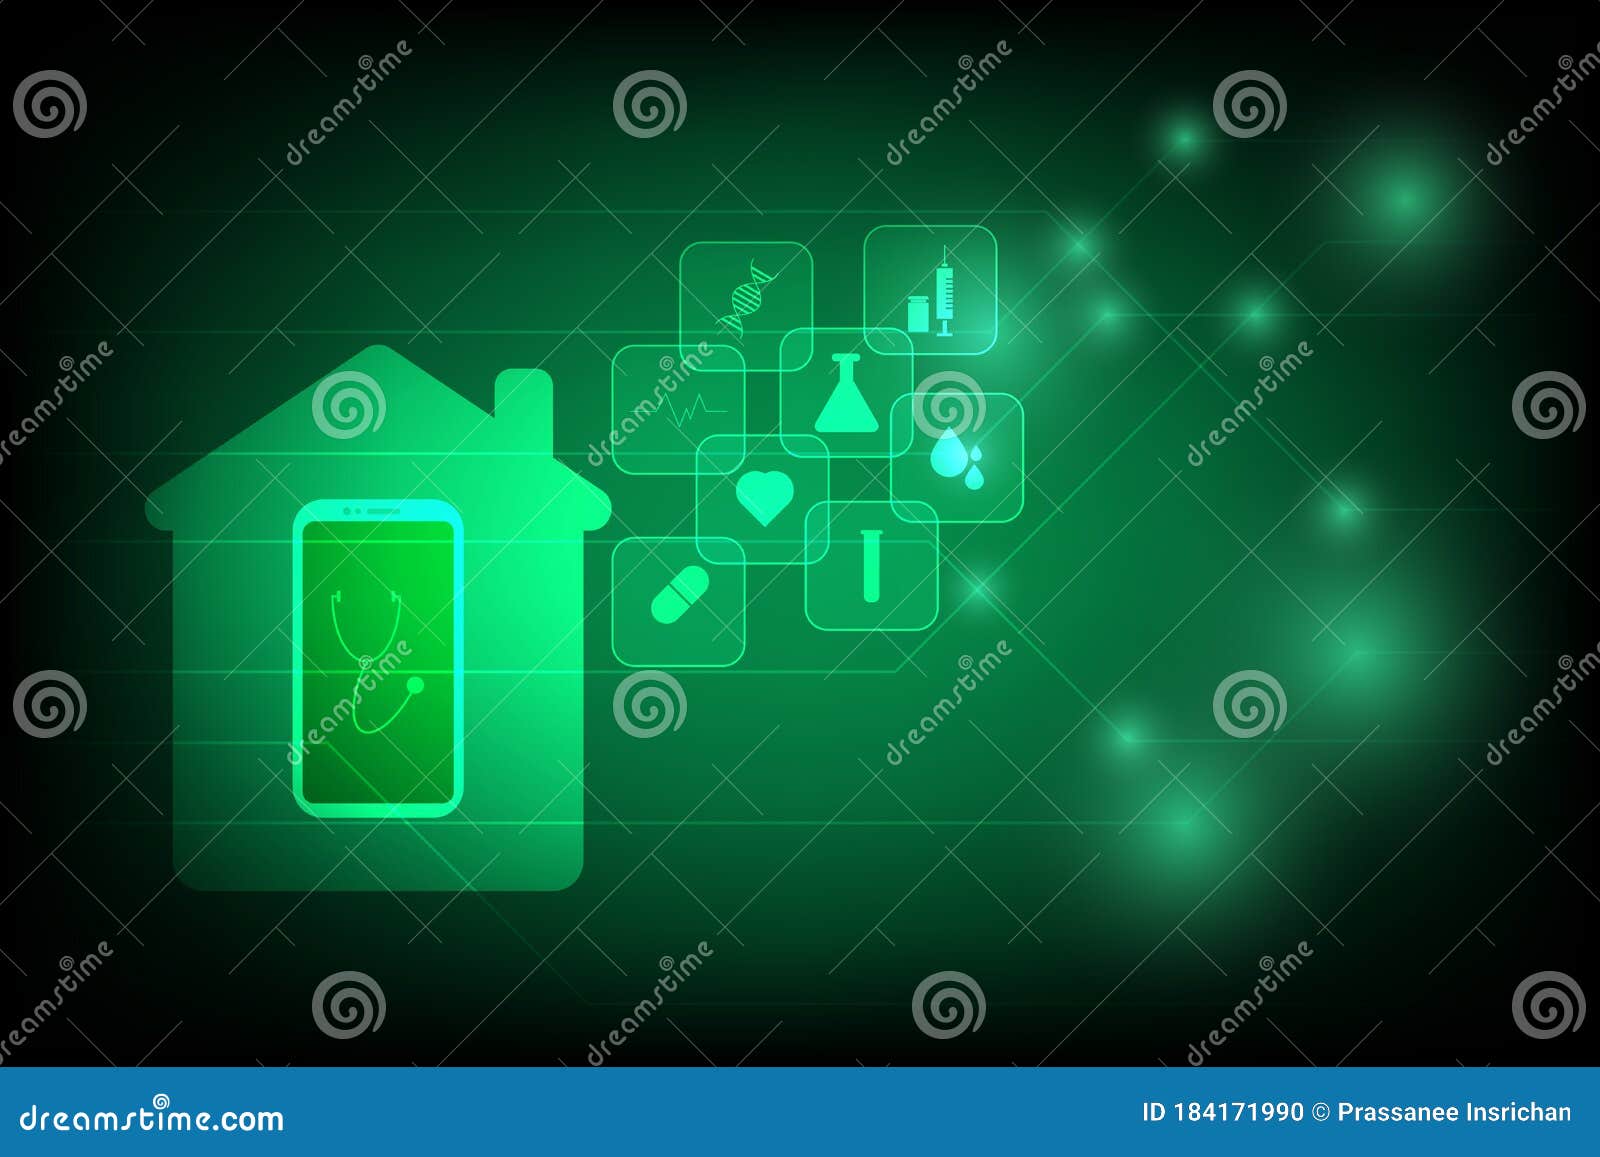 Telemedicine Medical Technology Online Healthcare Concept Smartphone Or Tablet In House With Health Icon On Virtual Screen On Stock Illustration - Illustration Of Drug Business 184171990